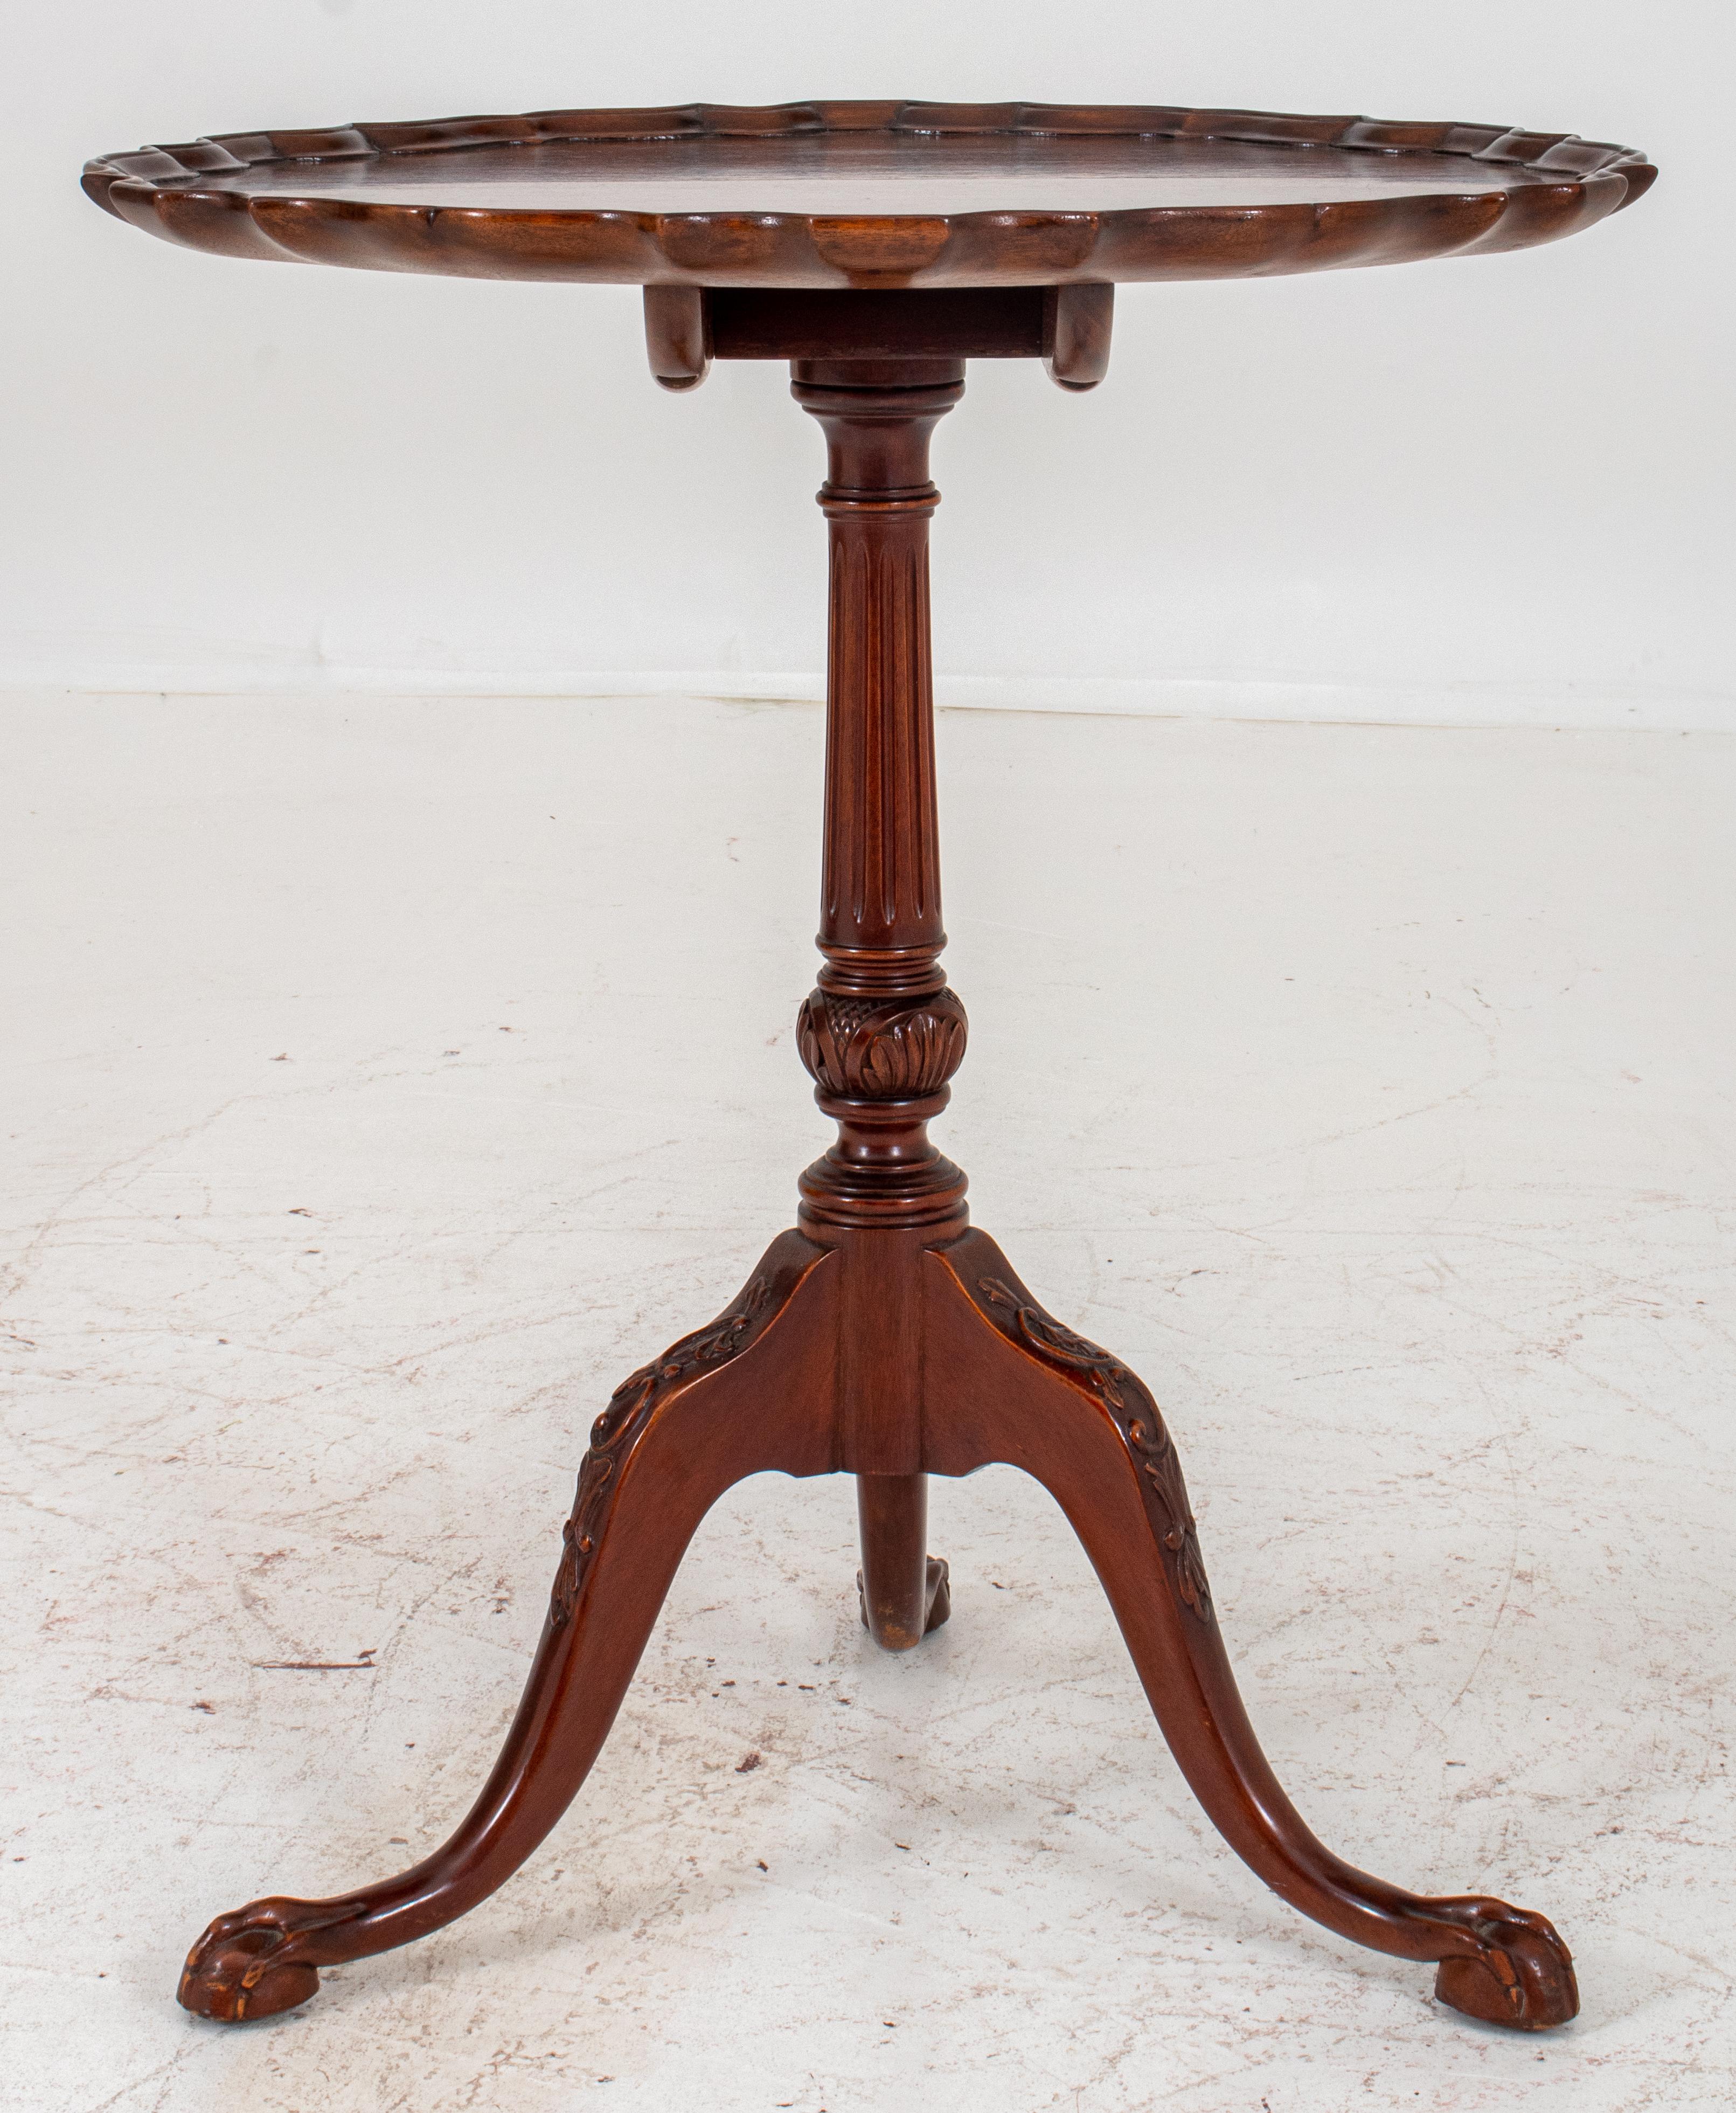 George III style Mahogany tilt-top tea table, round and with pie-crust edge,above a central pedestal on three legs engraved with rocailles, and on claw-and-ball feet. Measures: 28